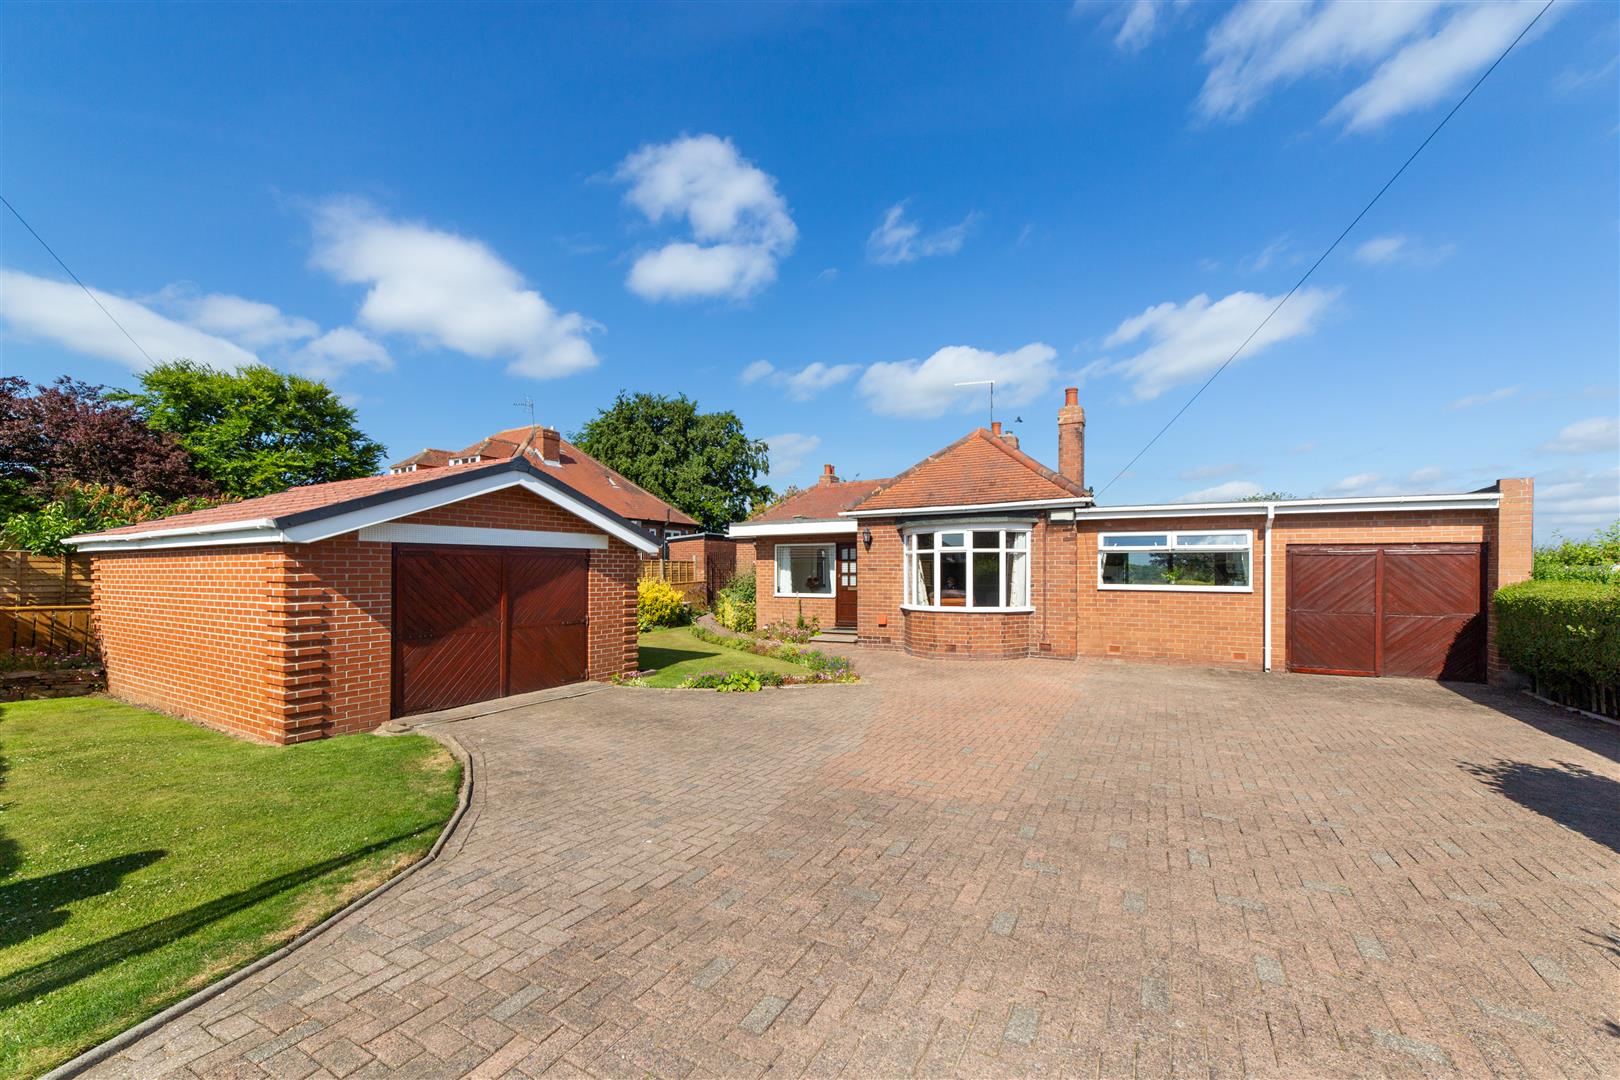 3 bed detached bungalow for sale in Station Road, Kenton Bank Foot  - Property Image 1